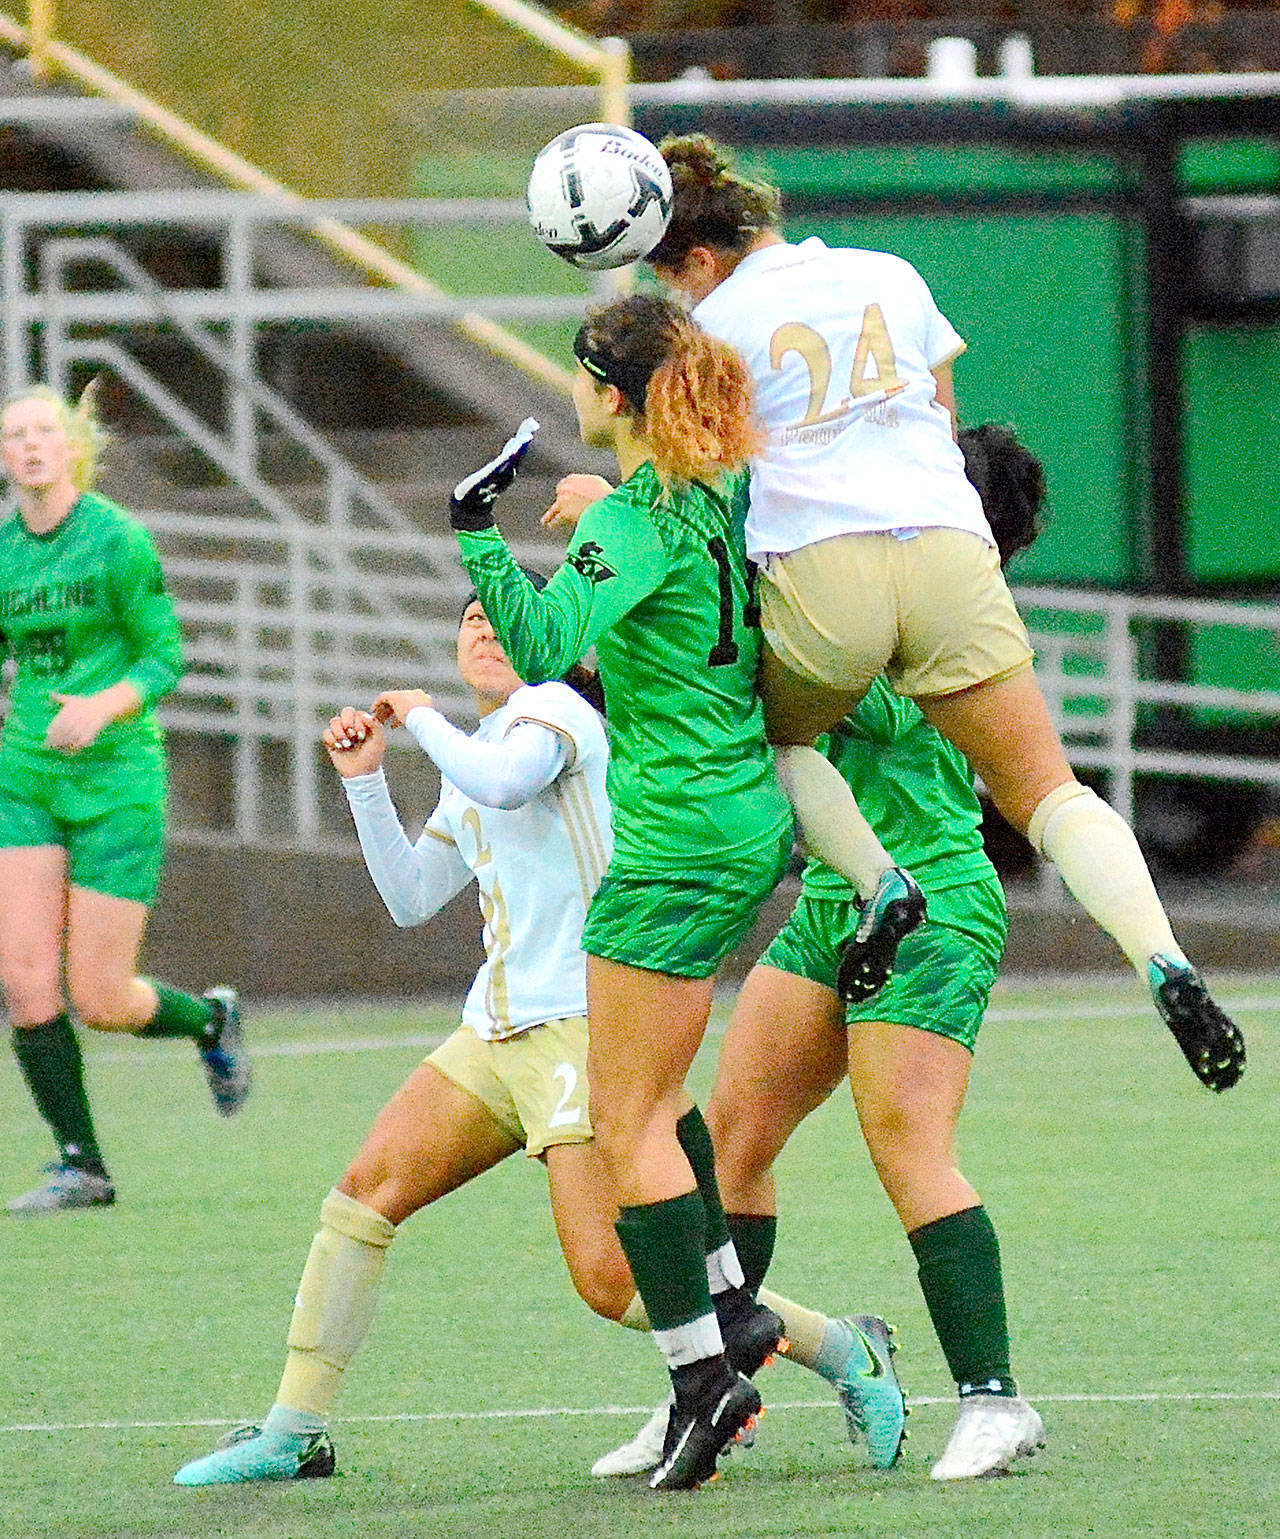 Peninsula’s Janis Martinez-Ortiz (24) leaps high to head a ball against Highline in the Northwest Athletic Conference title game Sunday. Also in oin the play is Peninsula’s Brianna Duran (2). Highline scored in overtime to win 1-0. (Jay Cline/for Peninsula Daily News)